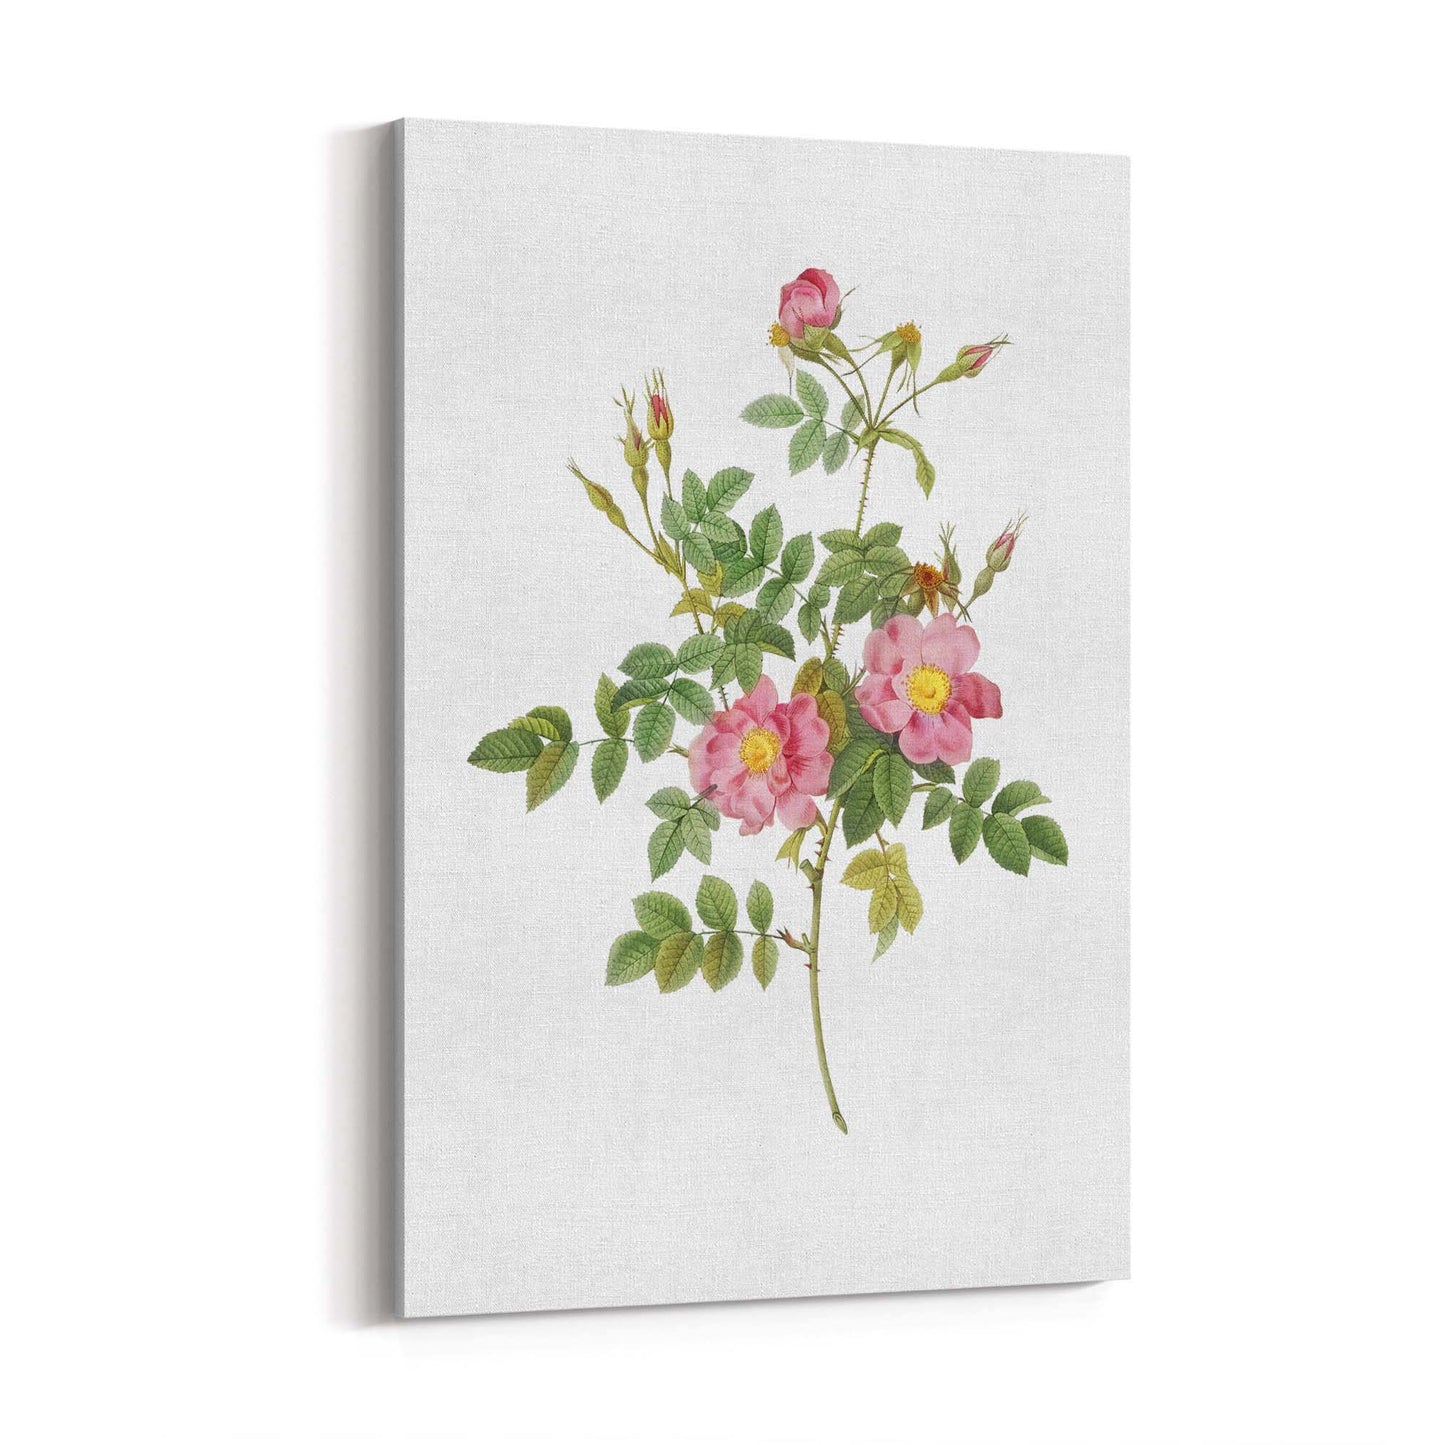 Flower Botanical Painting Kitchen Hallway Wall Art #47 - The Affordable Art Company